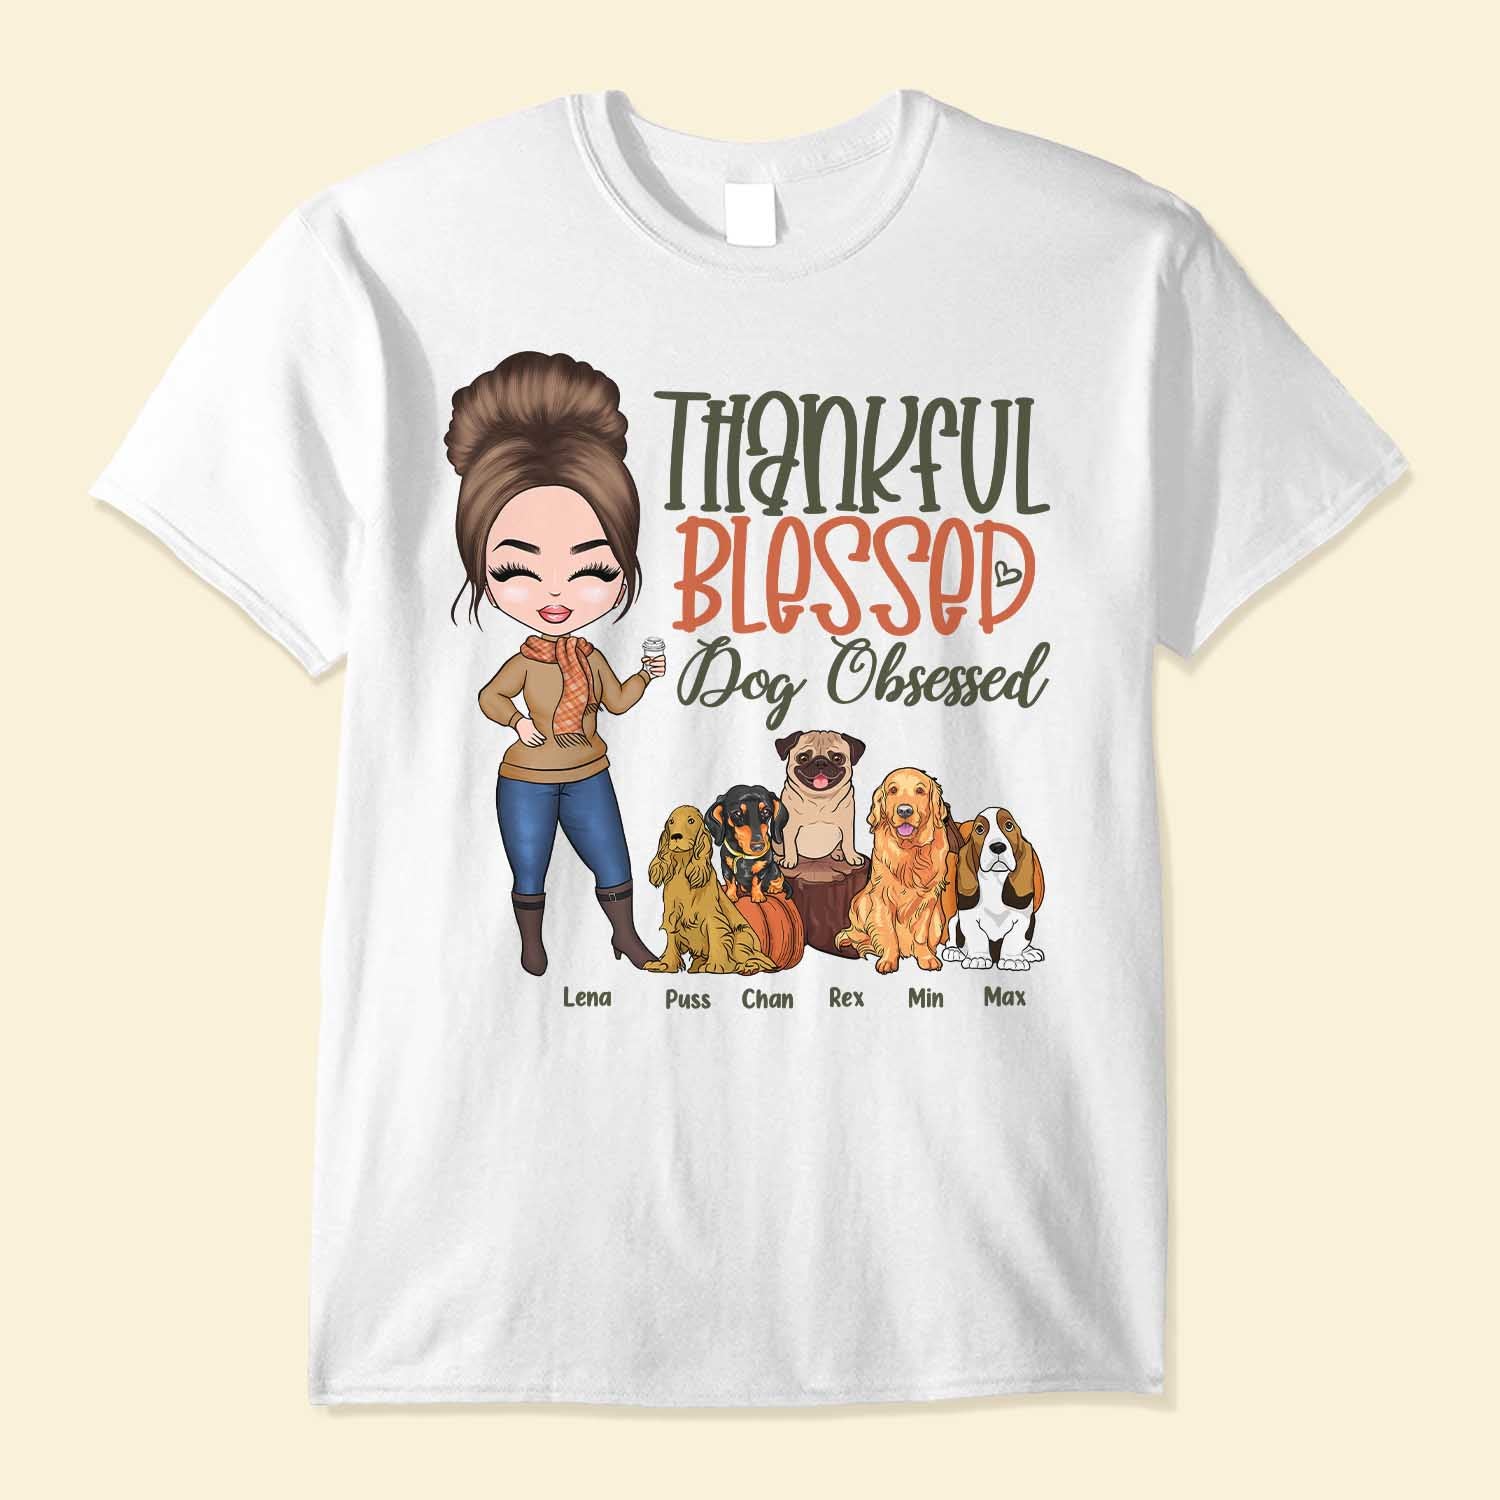 Thankful Blessed & Dog Obsessed - Personalized Shirt - Fall Season Gift For Dog Lover